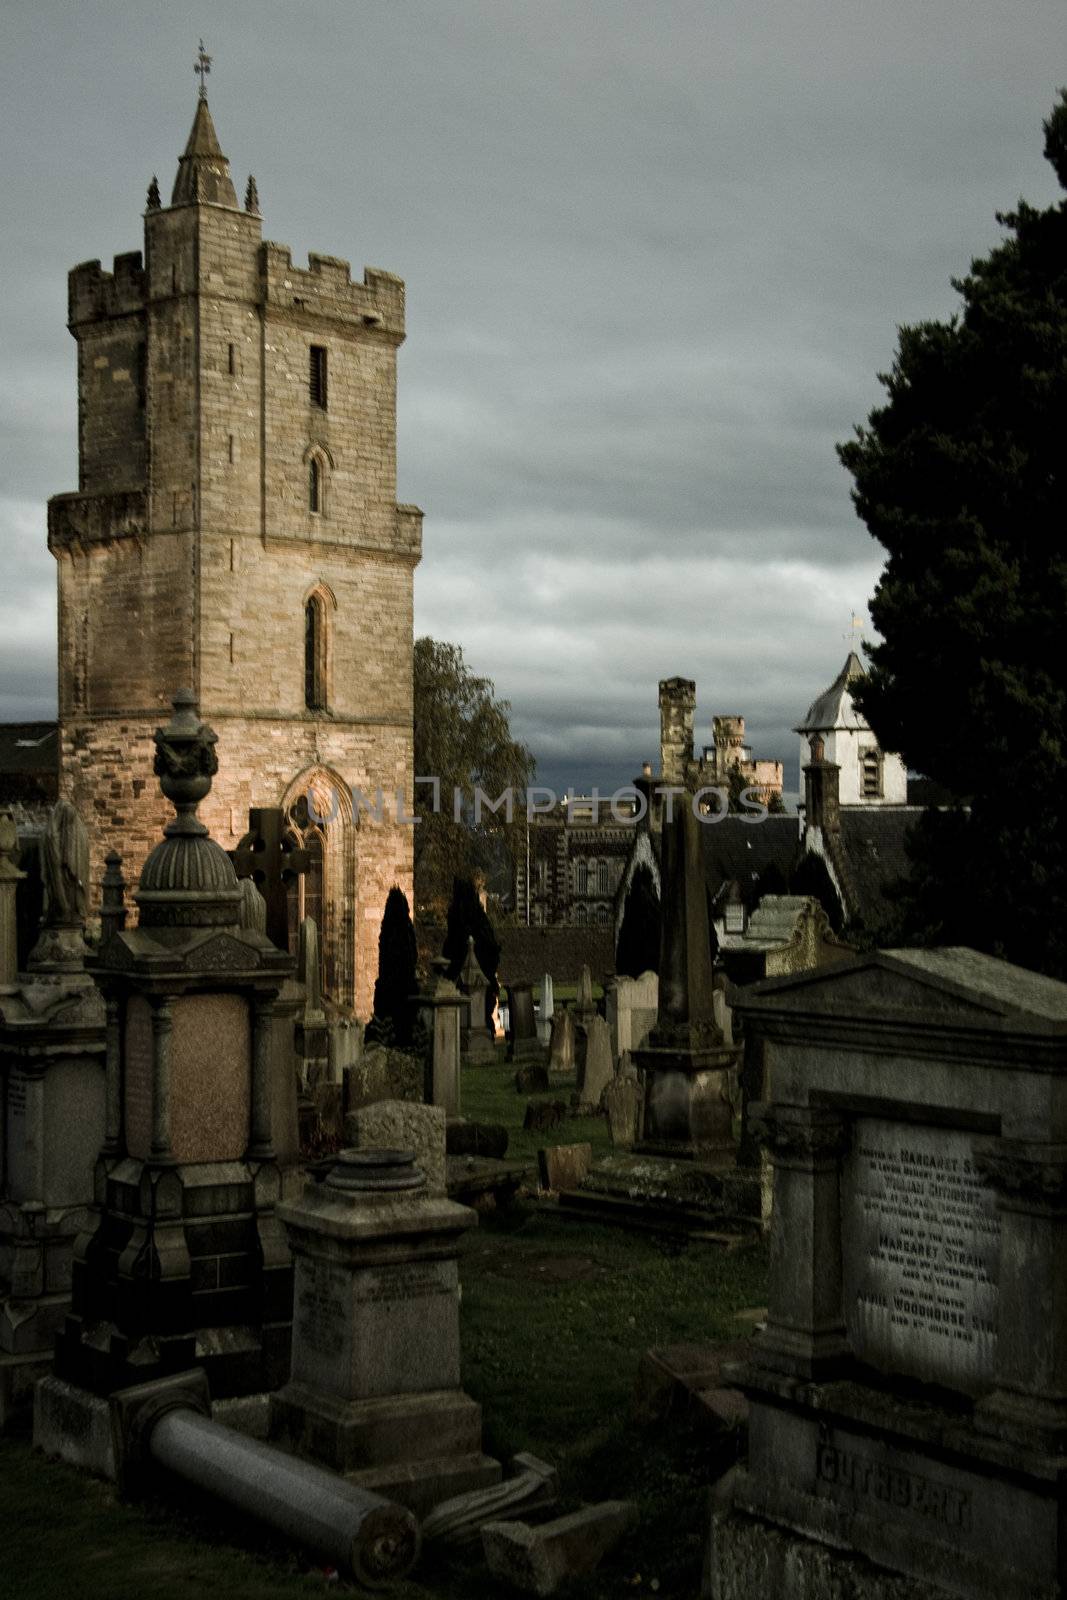 cemetery in stirling with tower in background by gewoldi